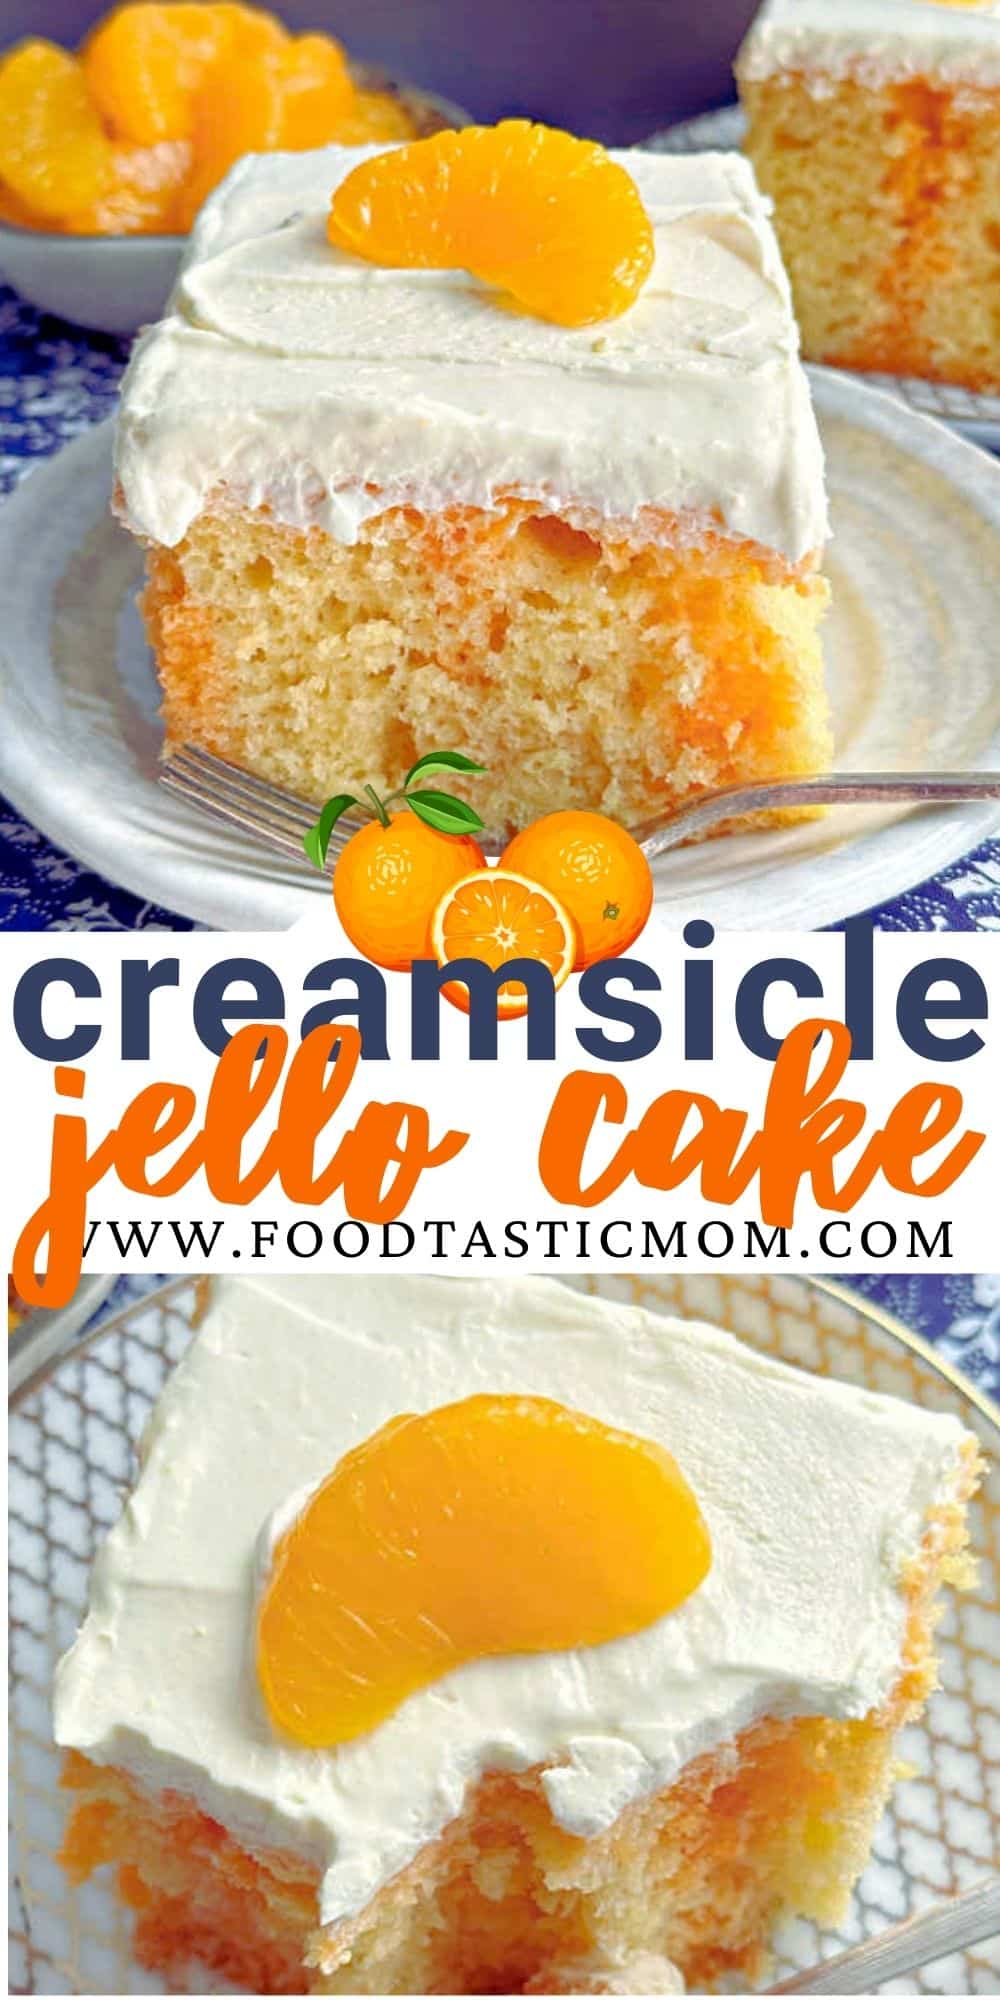 Jello cake is a vintage recipe that is a perfect dessert for family gatherings, sure to put a smile on everyone's face. A delicious cake that is so easy to make! via @foodtasticmom